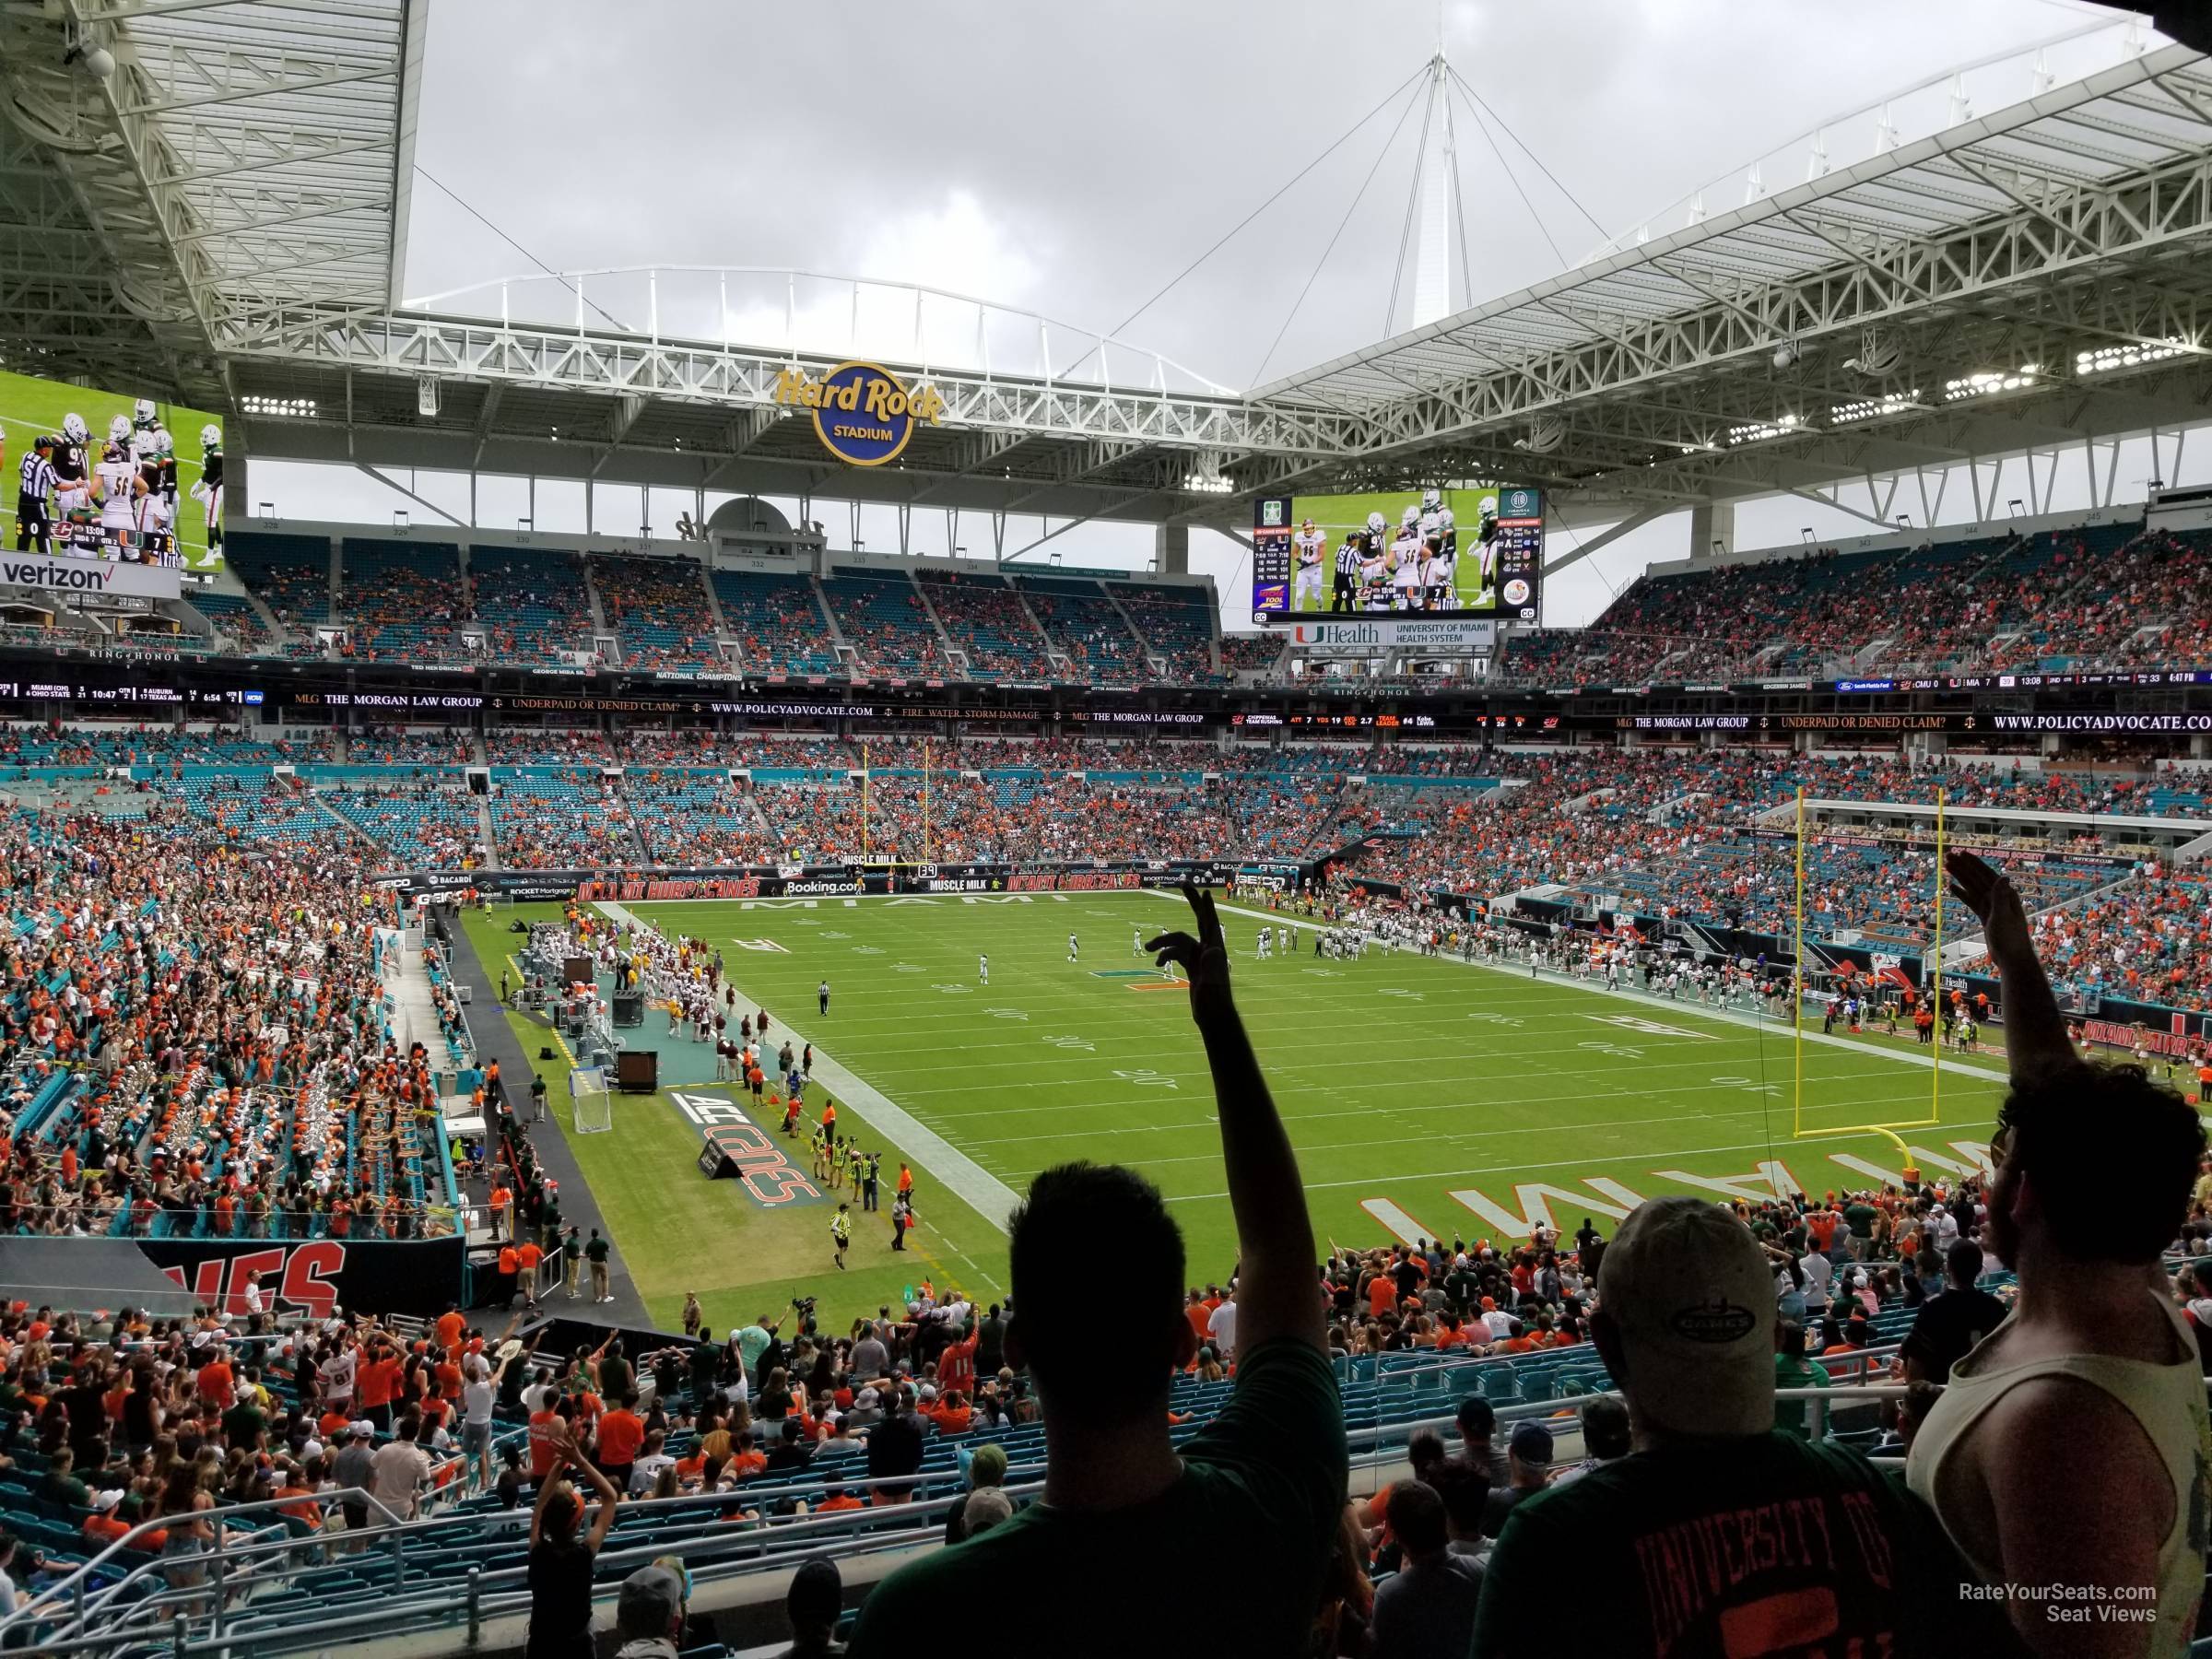 section 208, row 10 seat view  for football - hard rock stadium